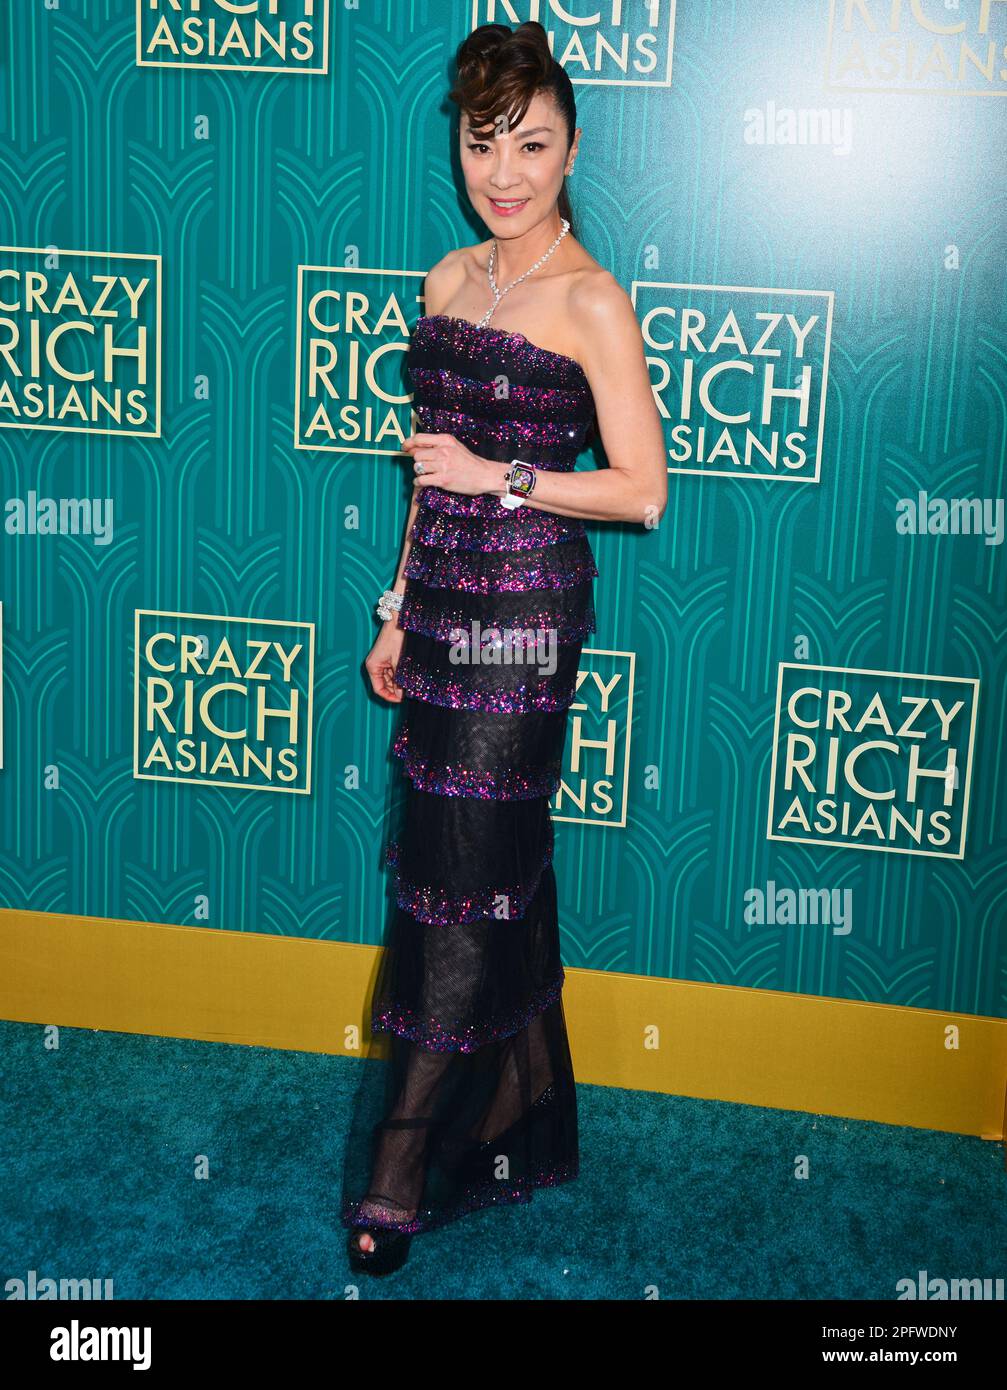 Michelle Yeoh 103 arrives at the Warner Bros. Pictures' 'Crazy Rich Asians' premiere at the TCL Chinese Theatre IMAX on August 7, 2018 in HollywoodRichard Belzer, Comedian and Law & Order- SVU Mainstay, Dead at 78    © Tsuni / USA a  Michelle Yeoh 103 Stock Photo